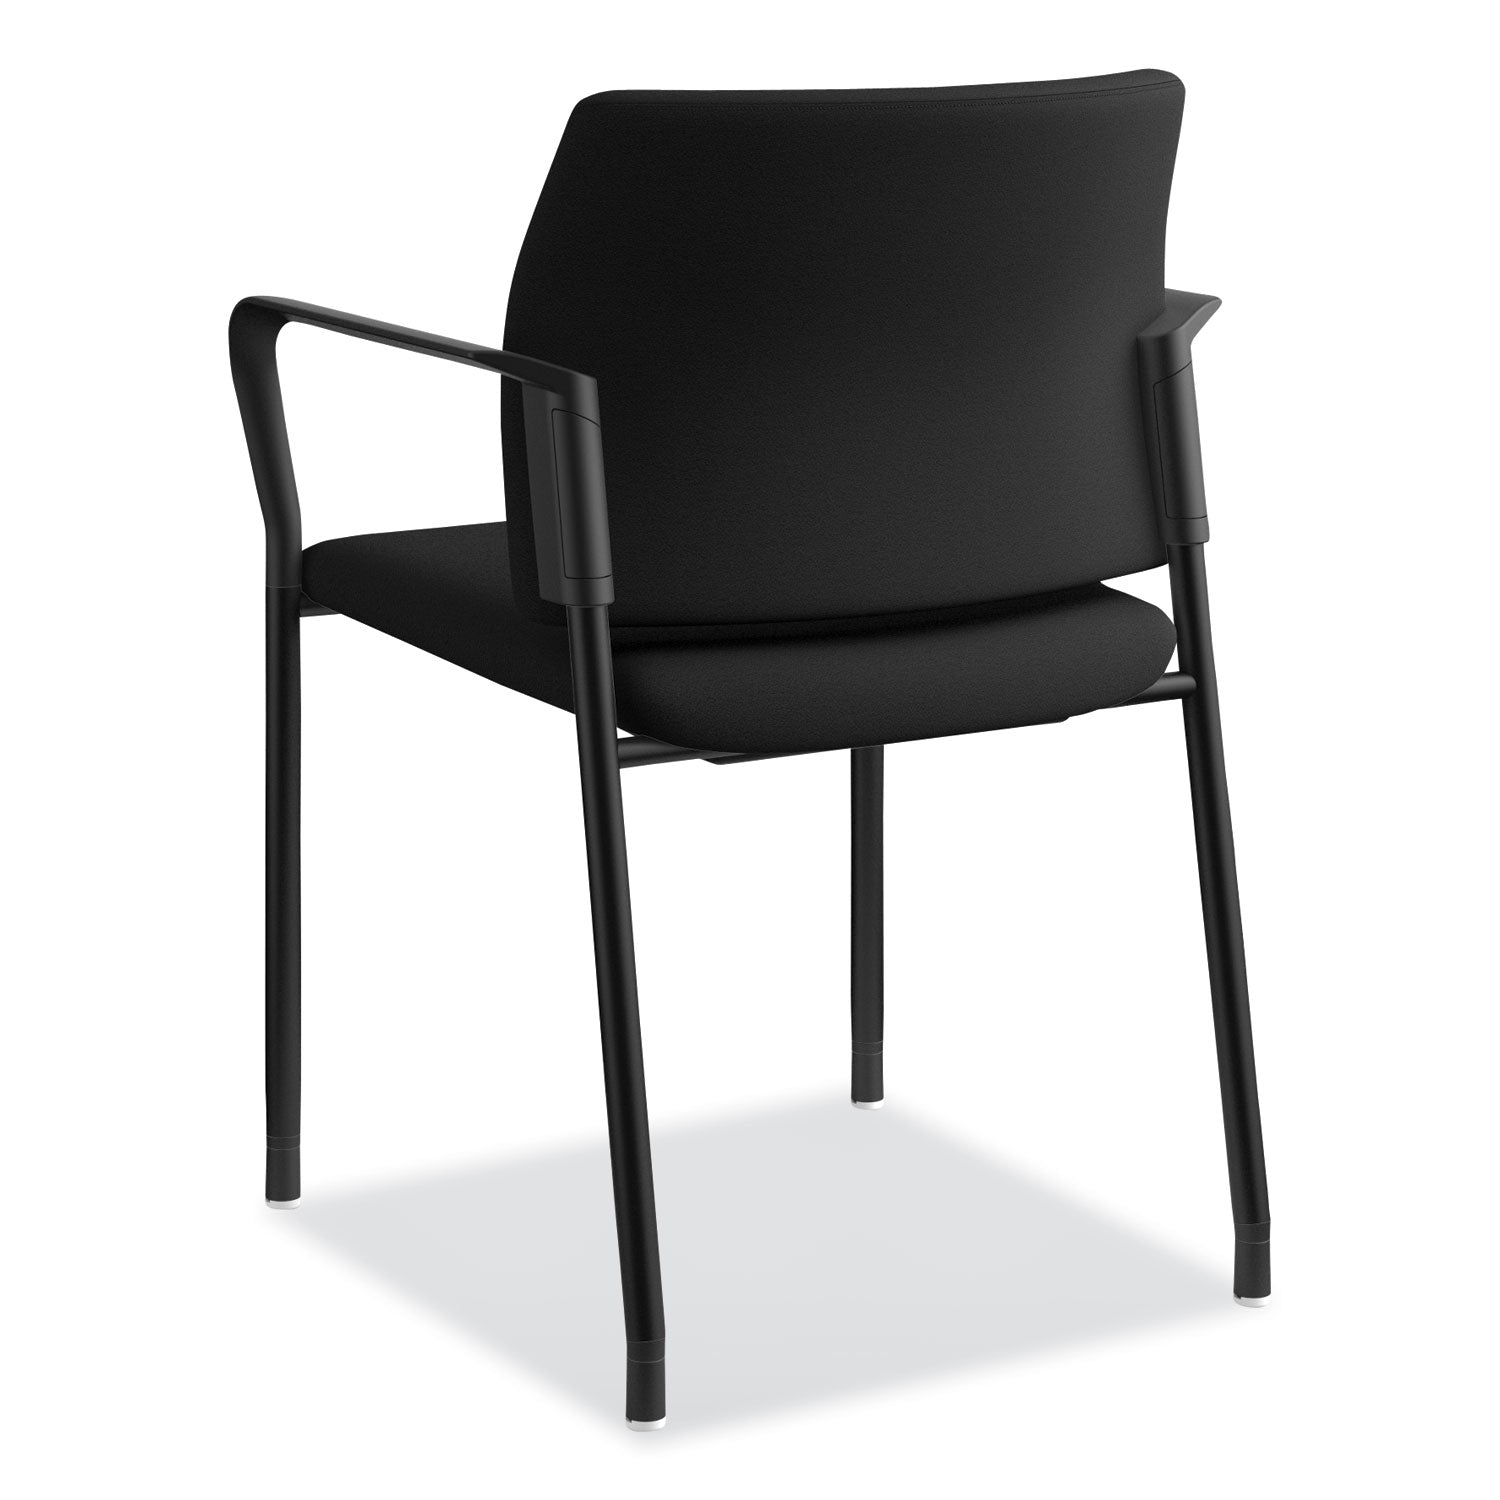 accommodate-series-guest-chair-with-arms-fabric-upholstery-2325-x-2225-x-32-black-seat-back-charblack-legs-2-carton_honsgs6fbc10c - 8